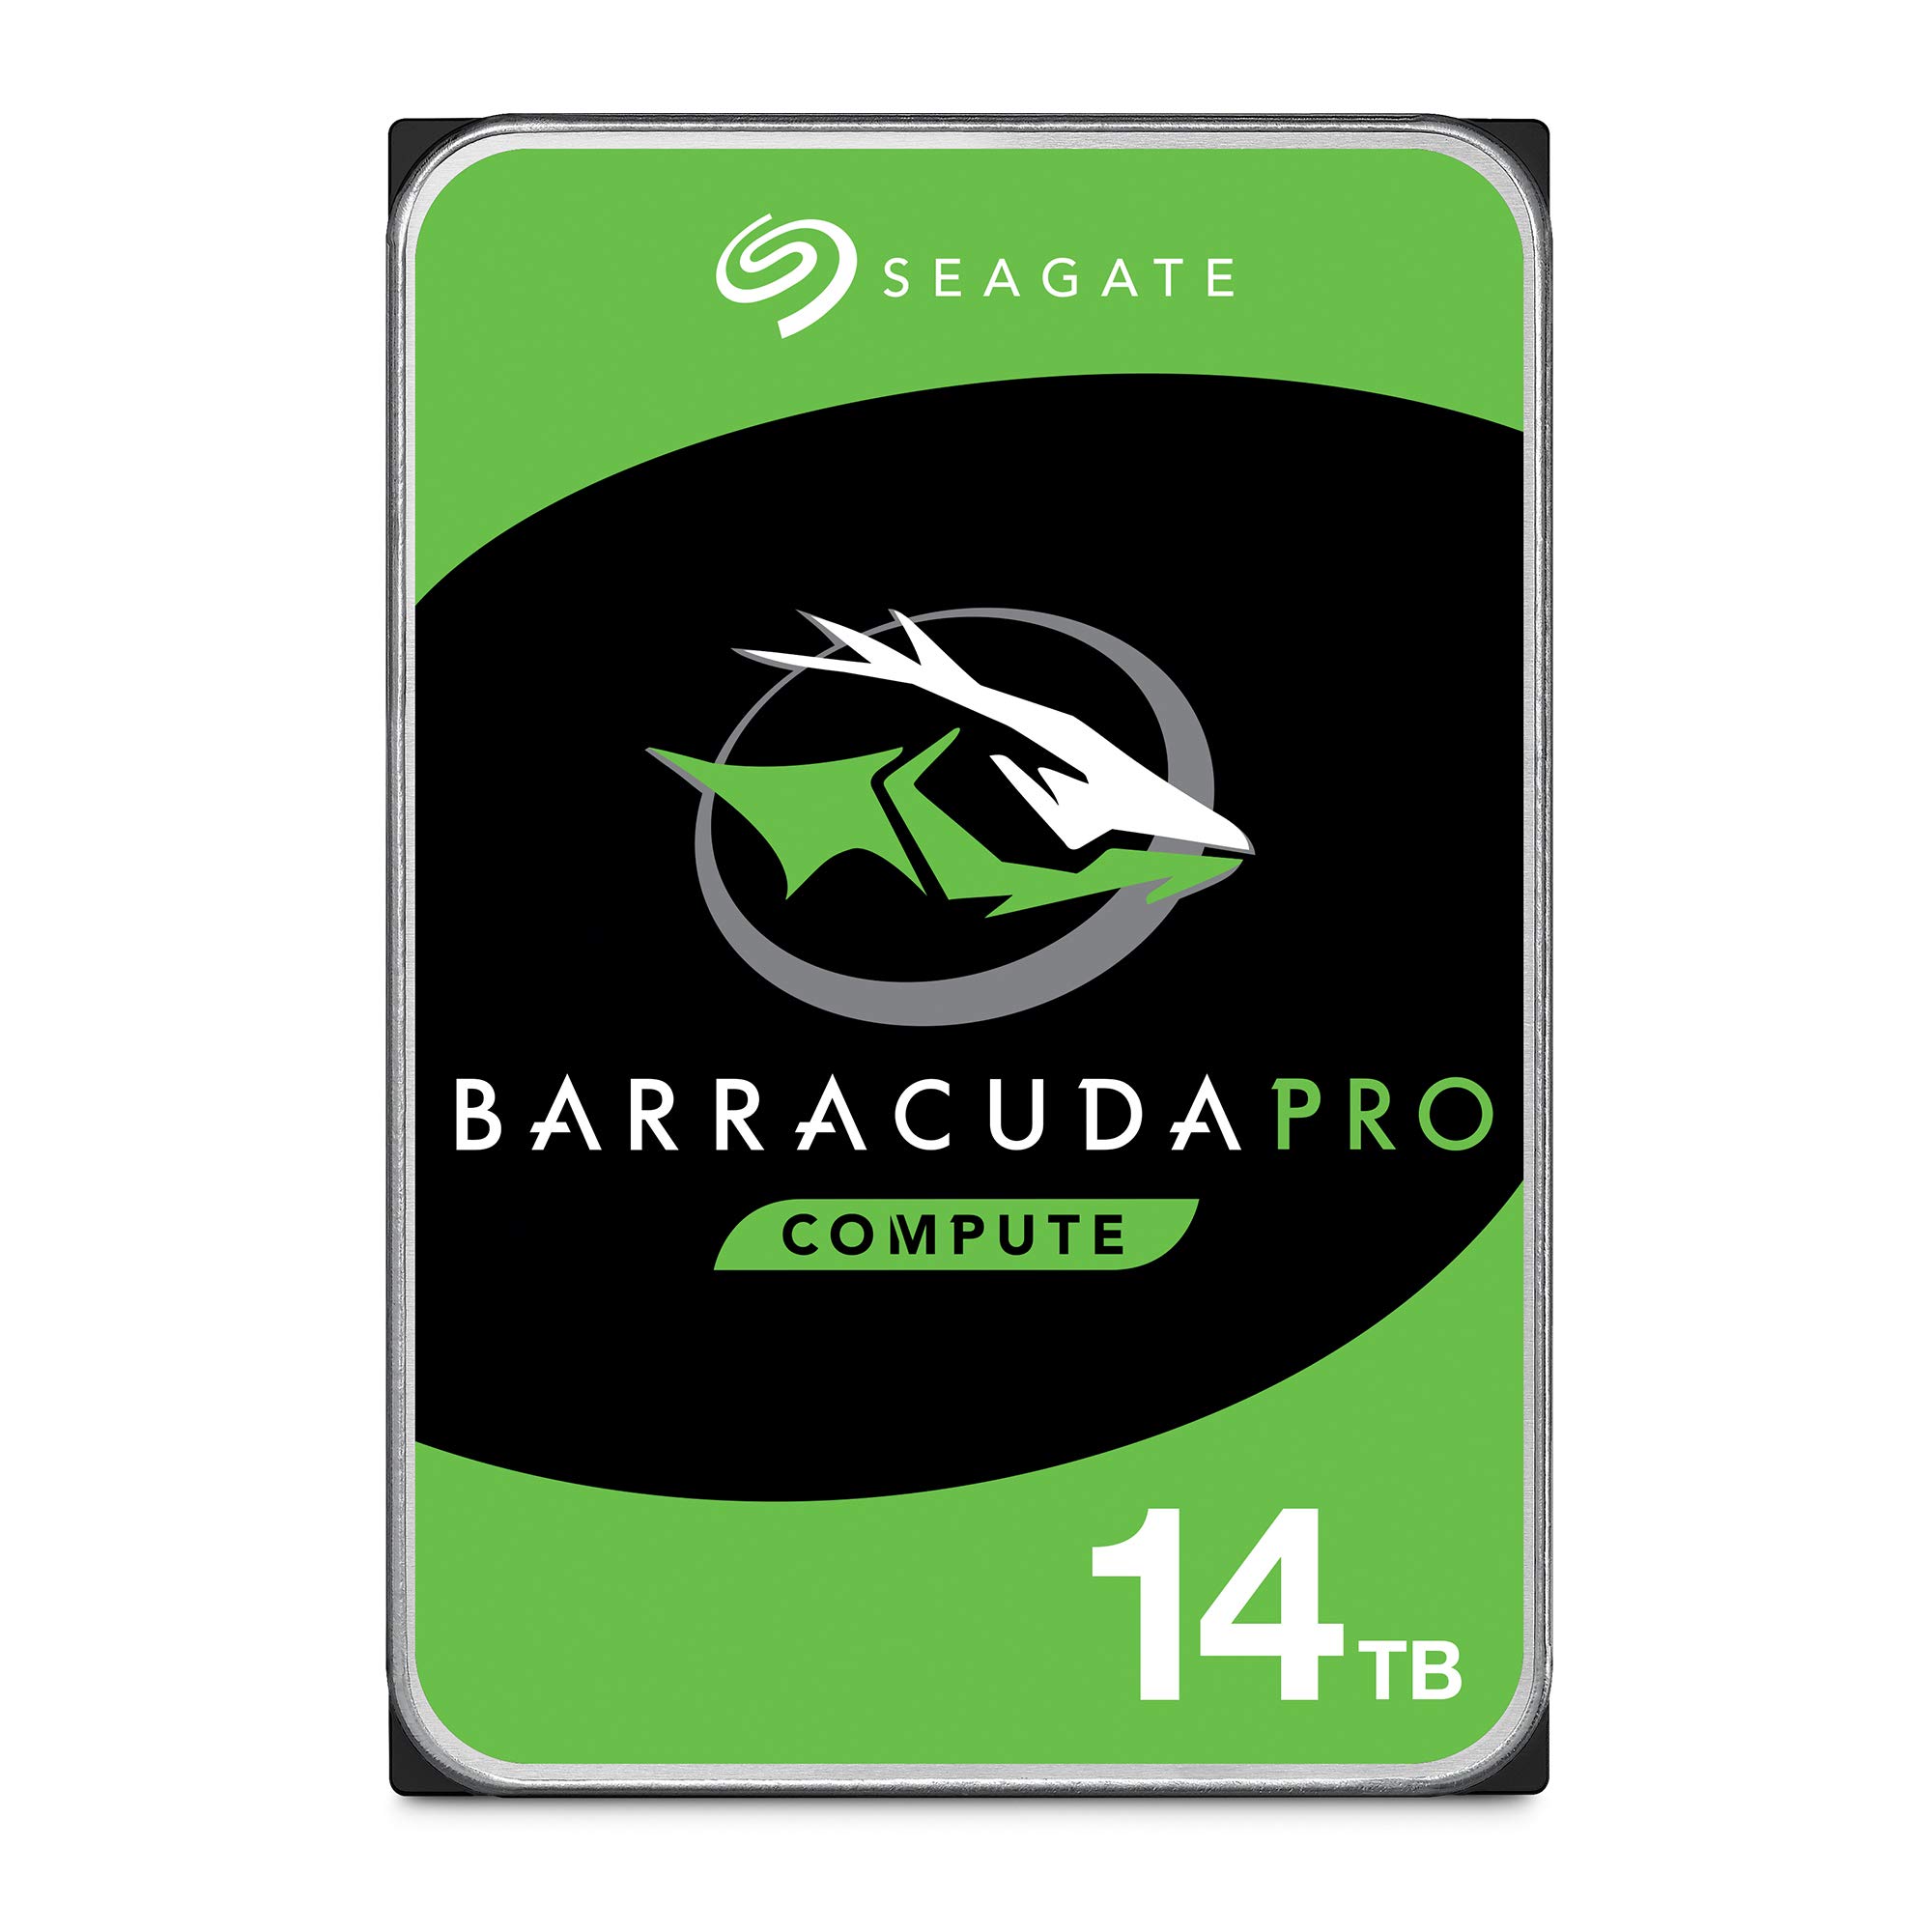 Seagate BarraCuda Pro Performance Internal Hard Drive SATA HDD 14TB 6GBs 256MB Cache 3.5-Inch - Frustration Free Packaging